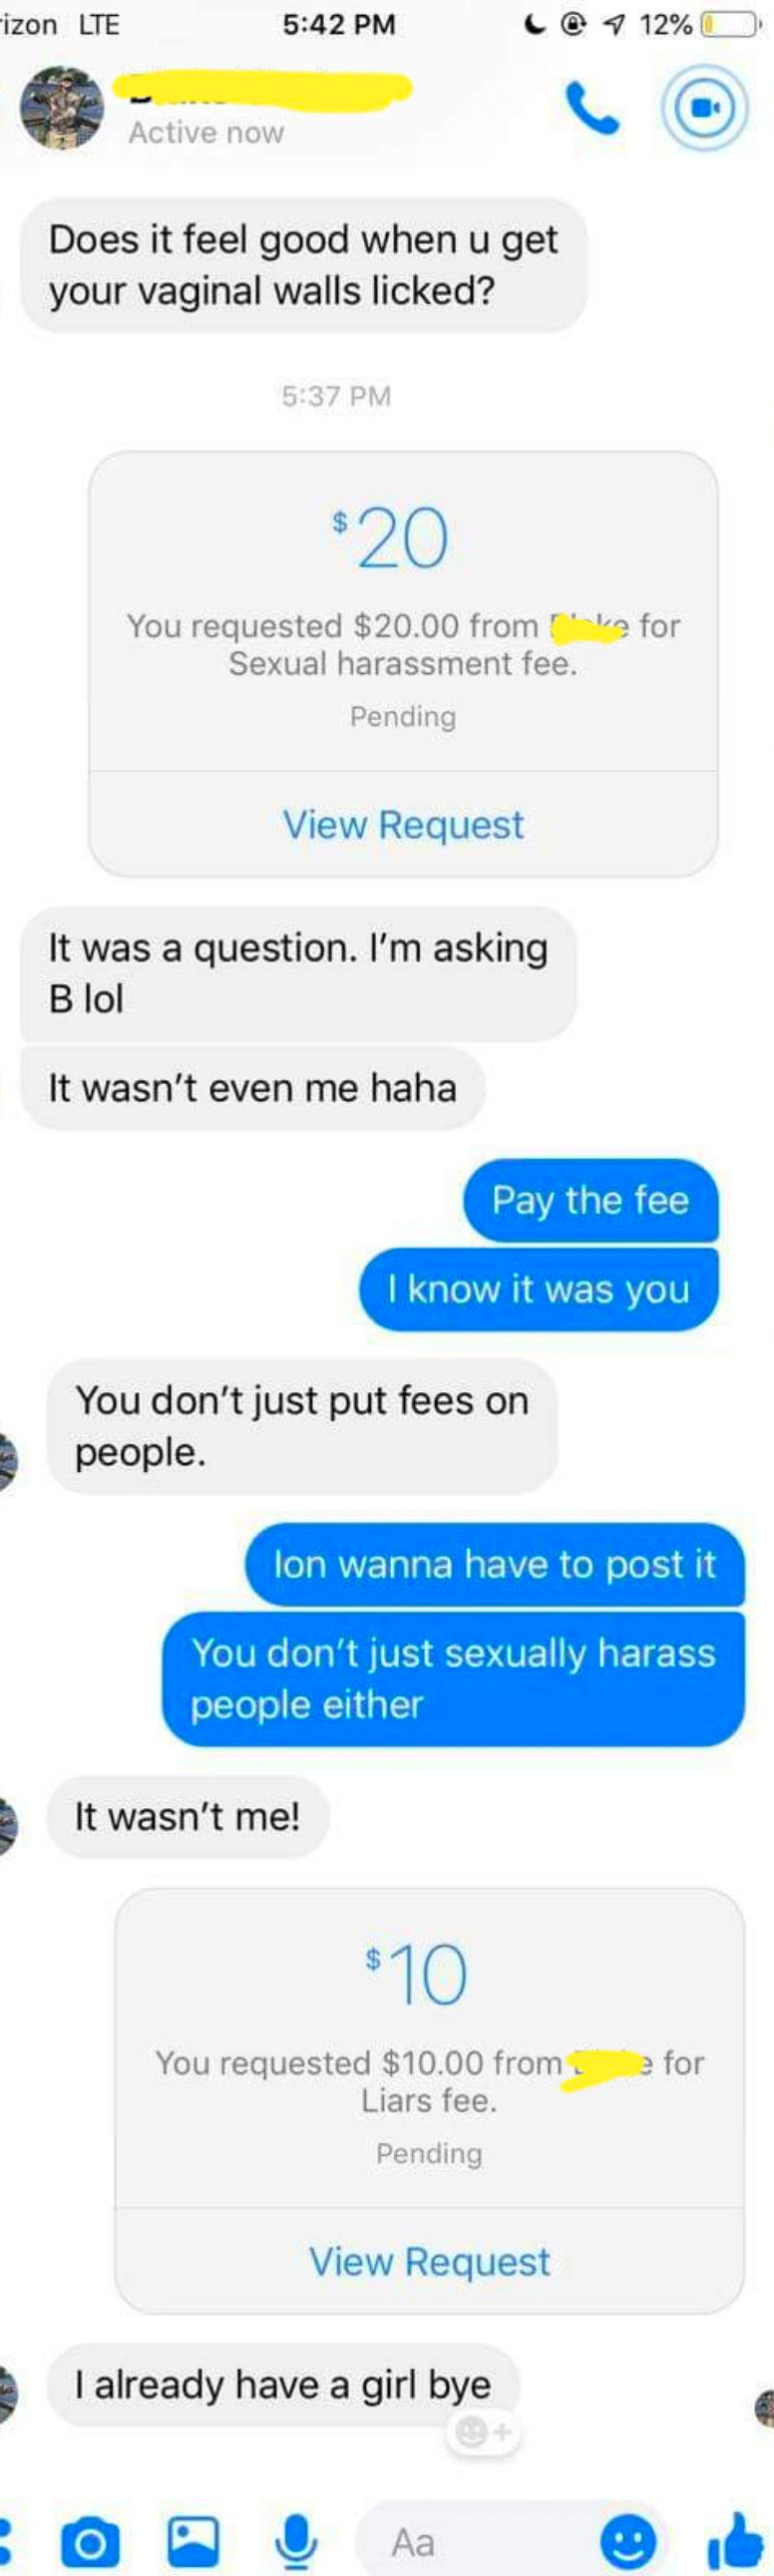 Person asks if it feels good when they get their vaginal walls licked, and when they&#x27;re charged a $20 sexual harassment fee, they say it wasn&#x27;t them, and they&#x27;re then charged a $10 fee for lying